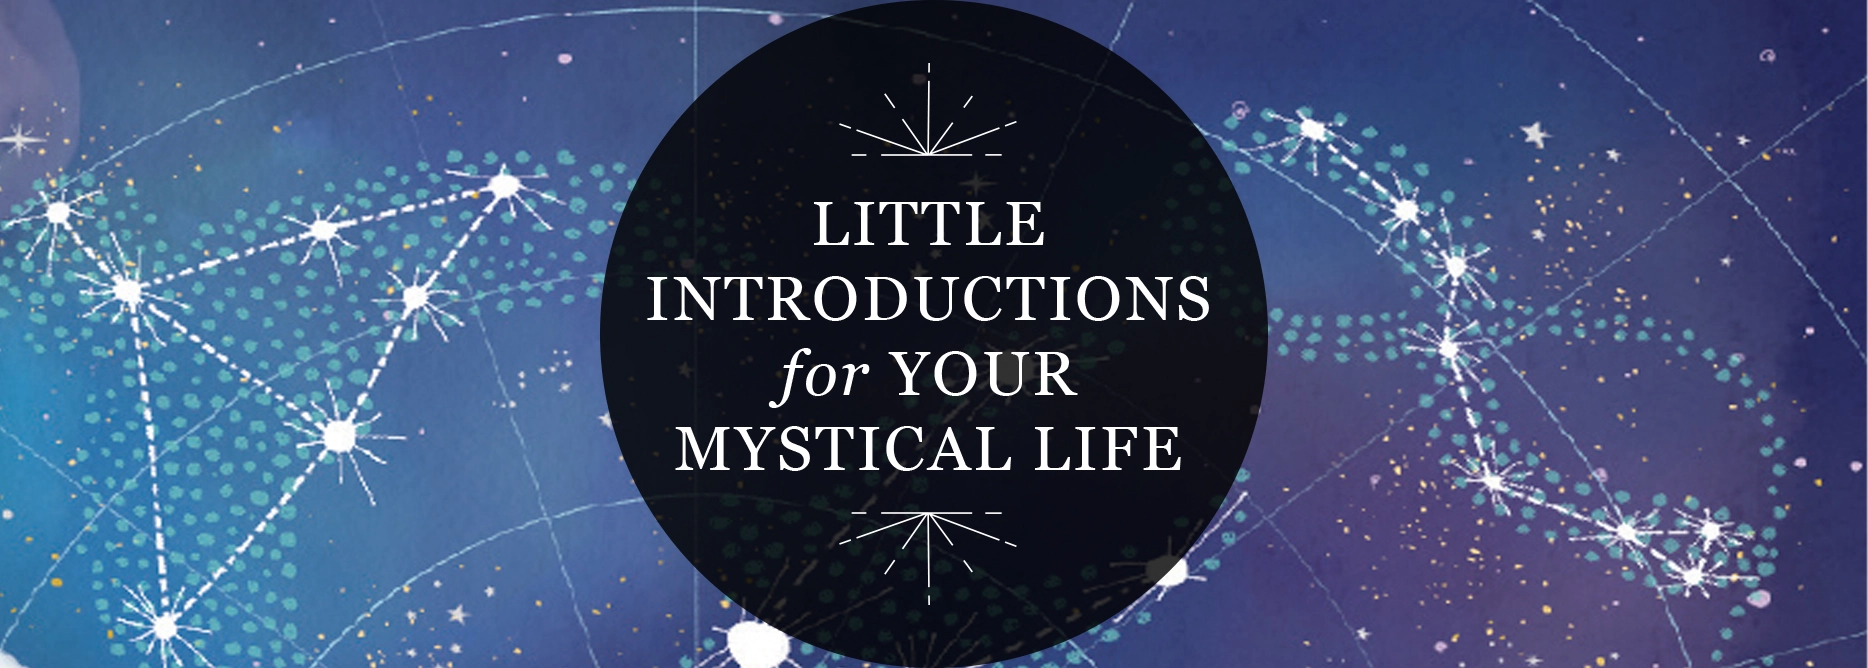 RP Mystic - Illustrated header image that reads 'Little Introductions for Your Mystical Life'